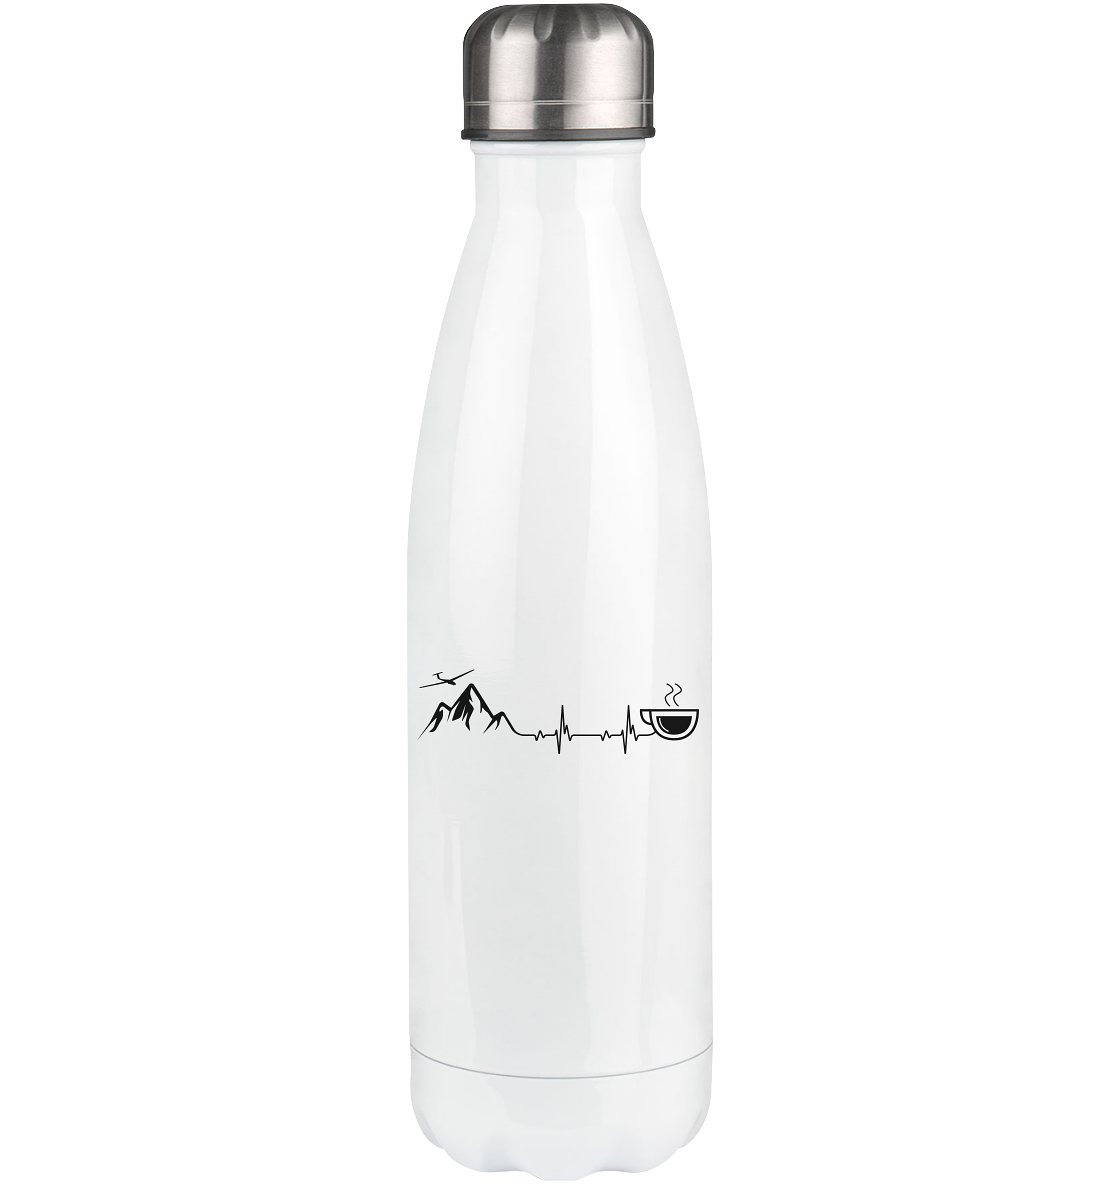 Heartbeat Coffee and Sailplane - Edelstahl Thermosflasche berge 500ml